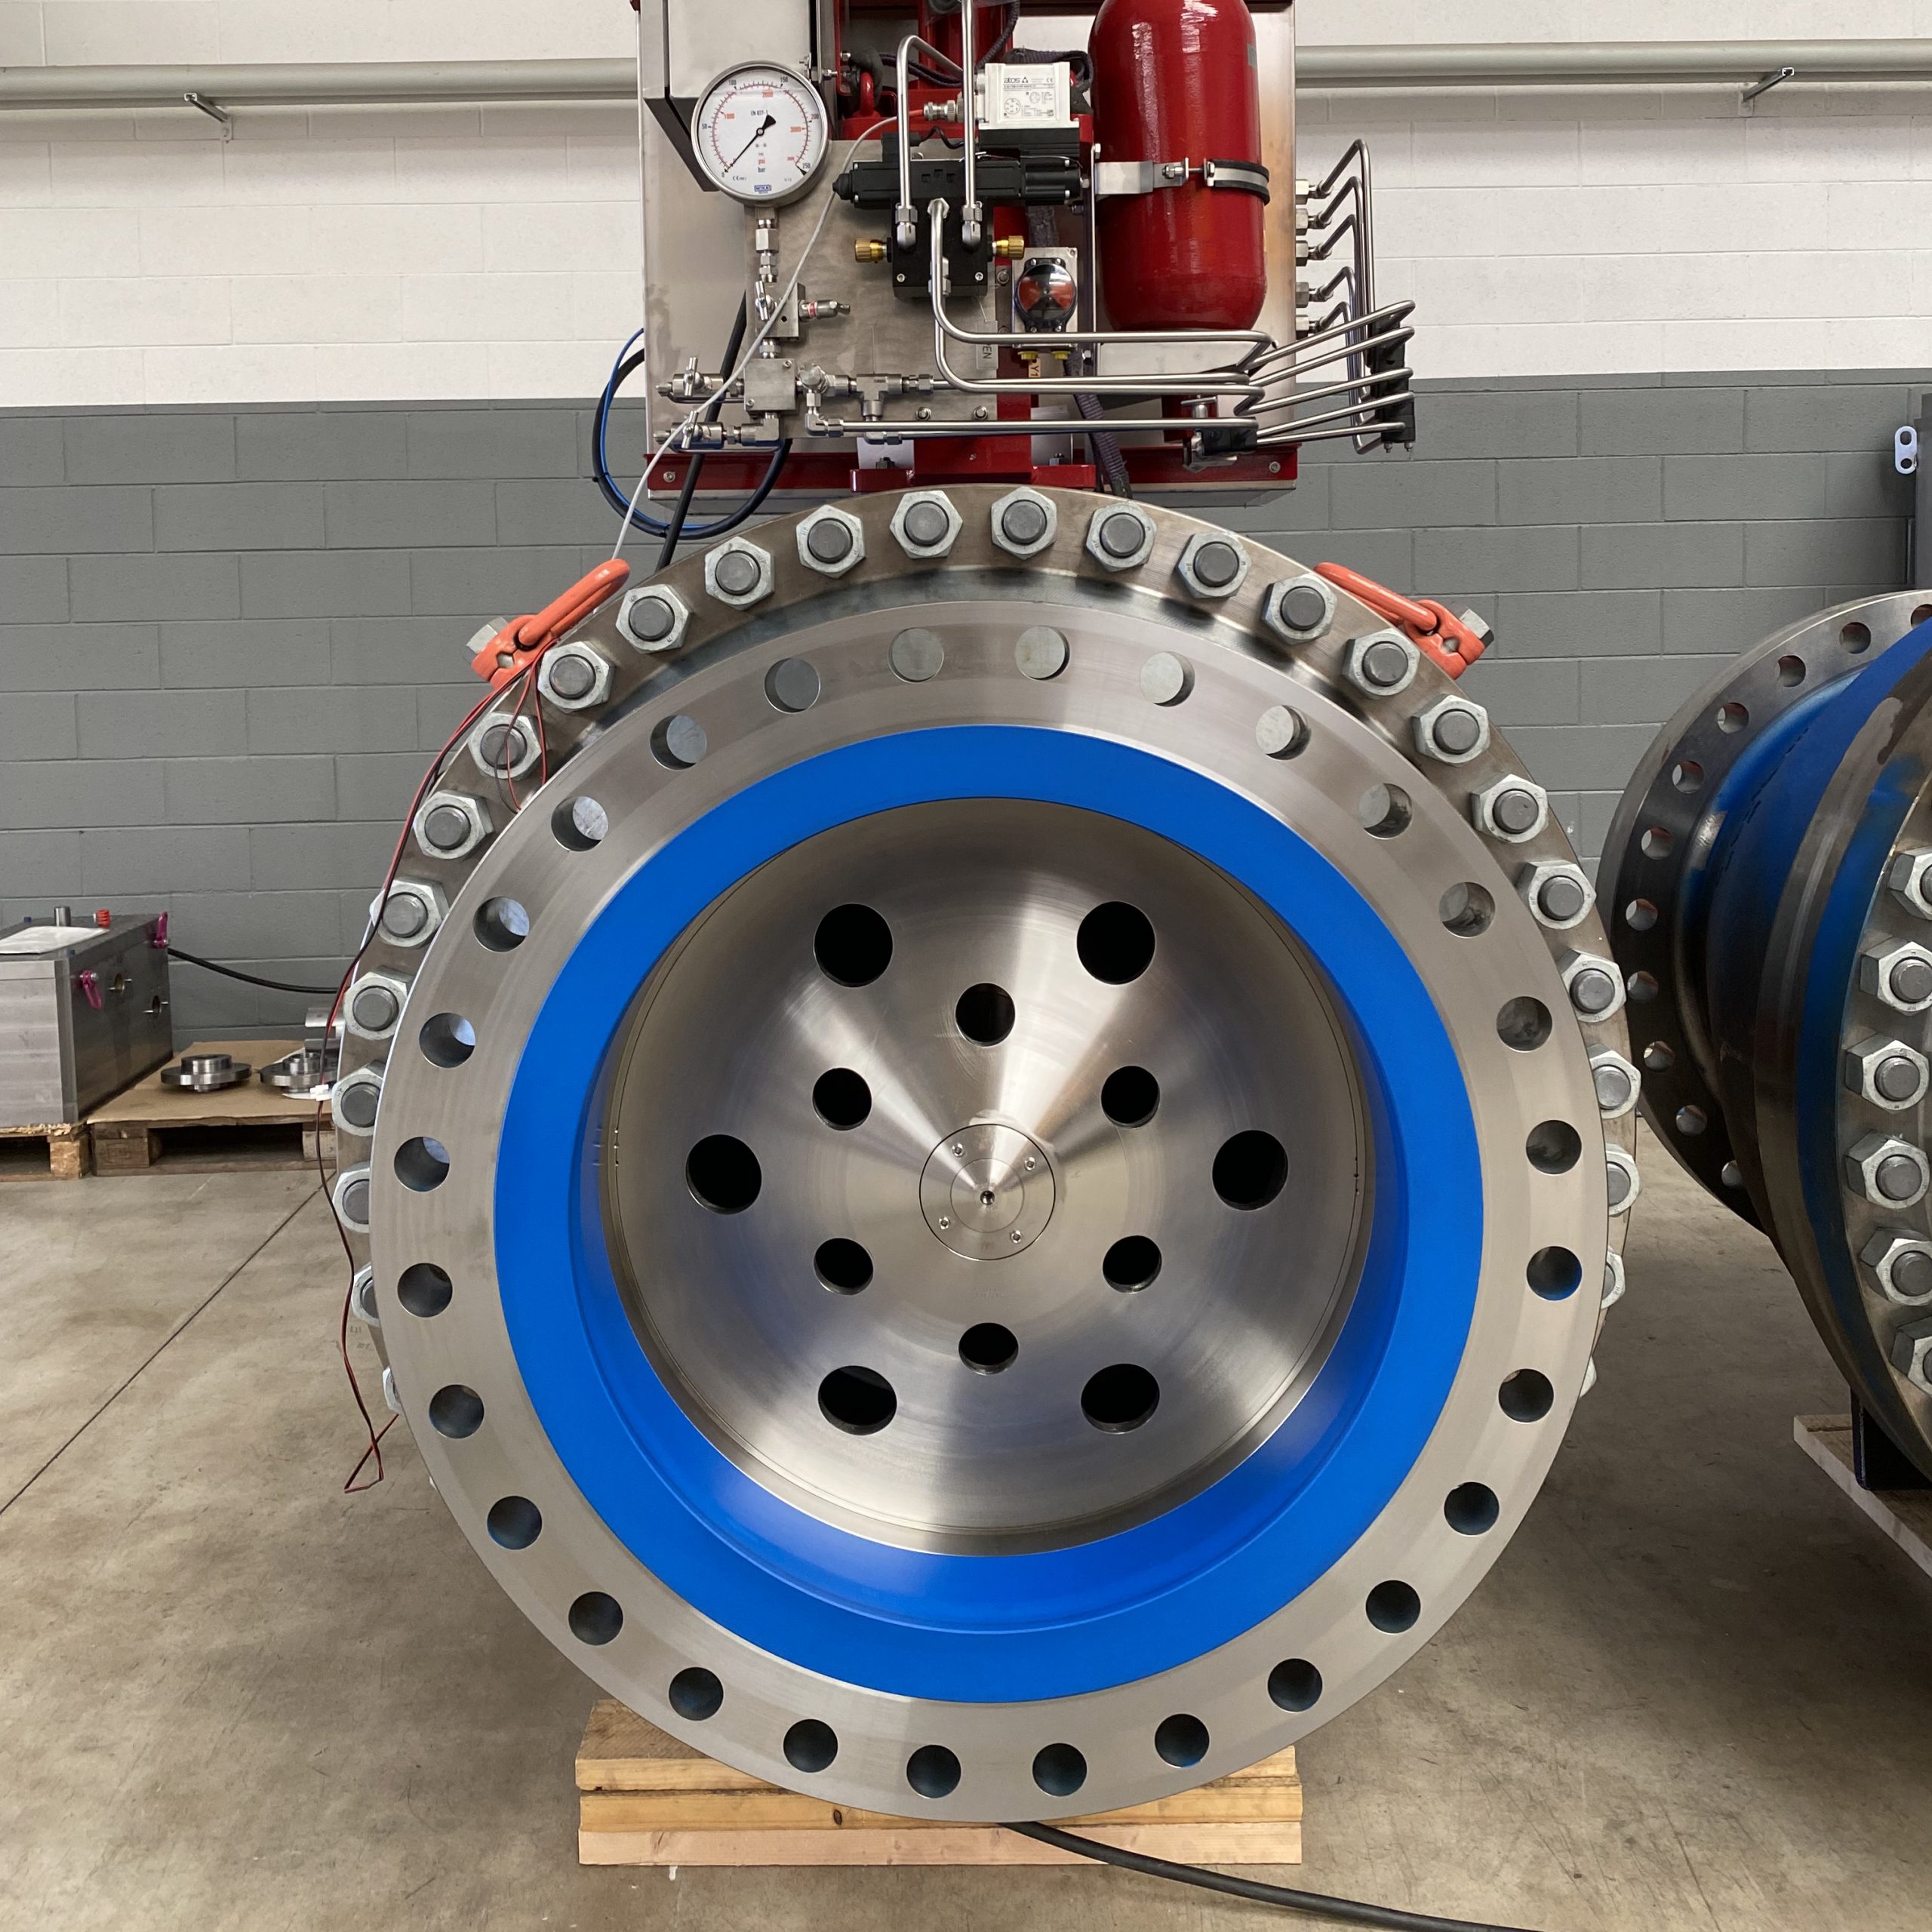 FG Valvole - Production of the first Axial Flow control Valves